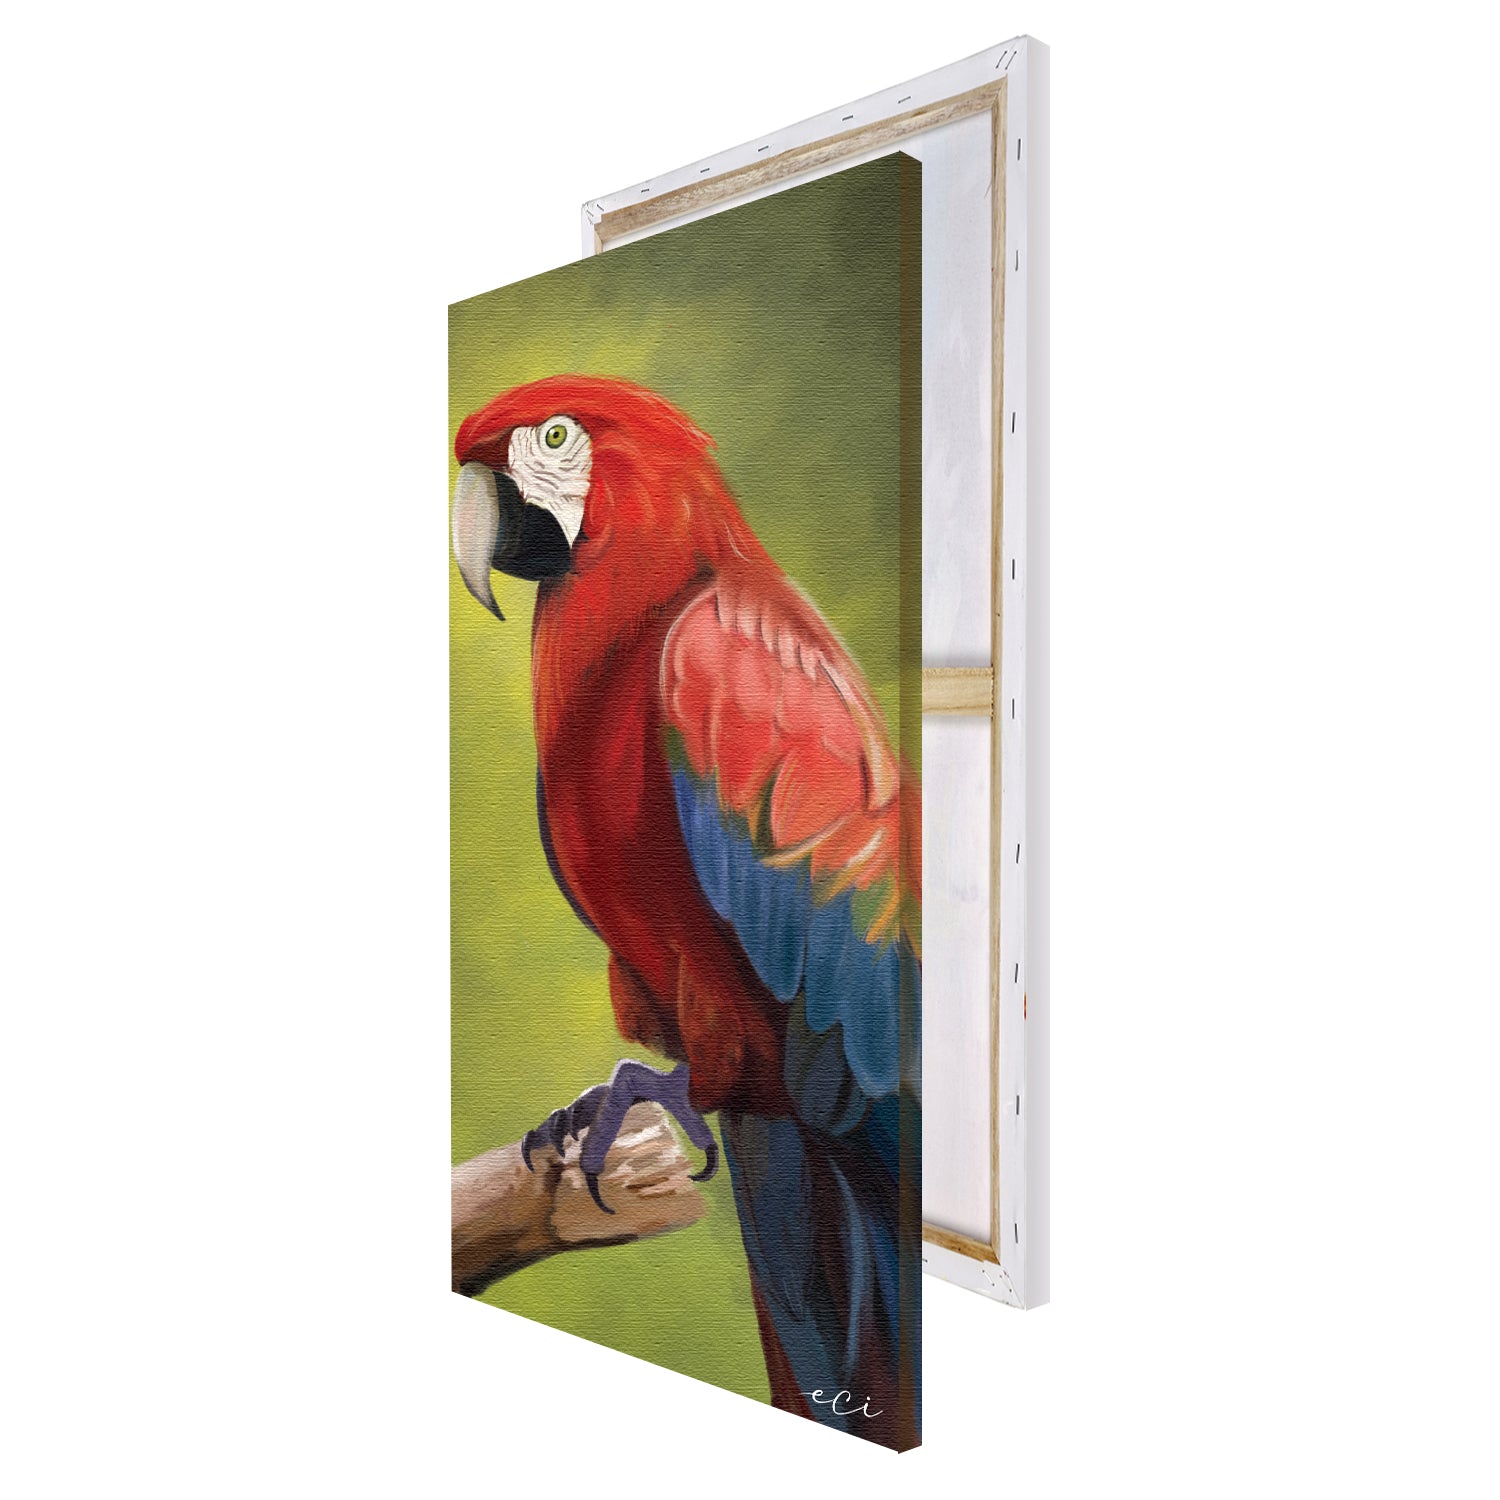 Parrot On Tree Branch Canvas Painting Digital Printed Bird Wall Art 4